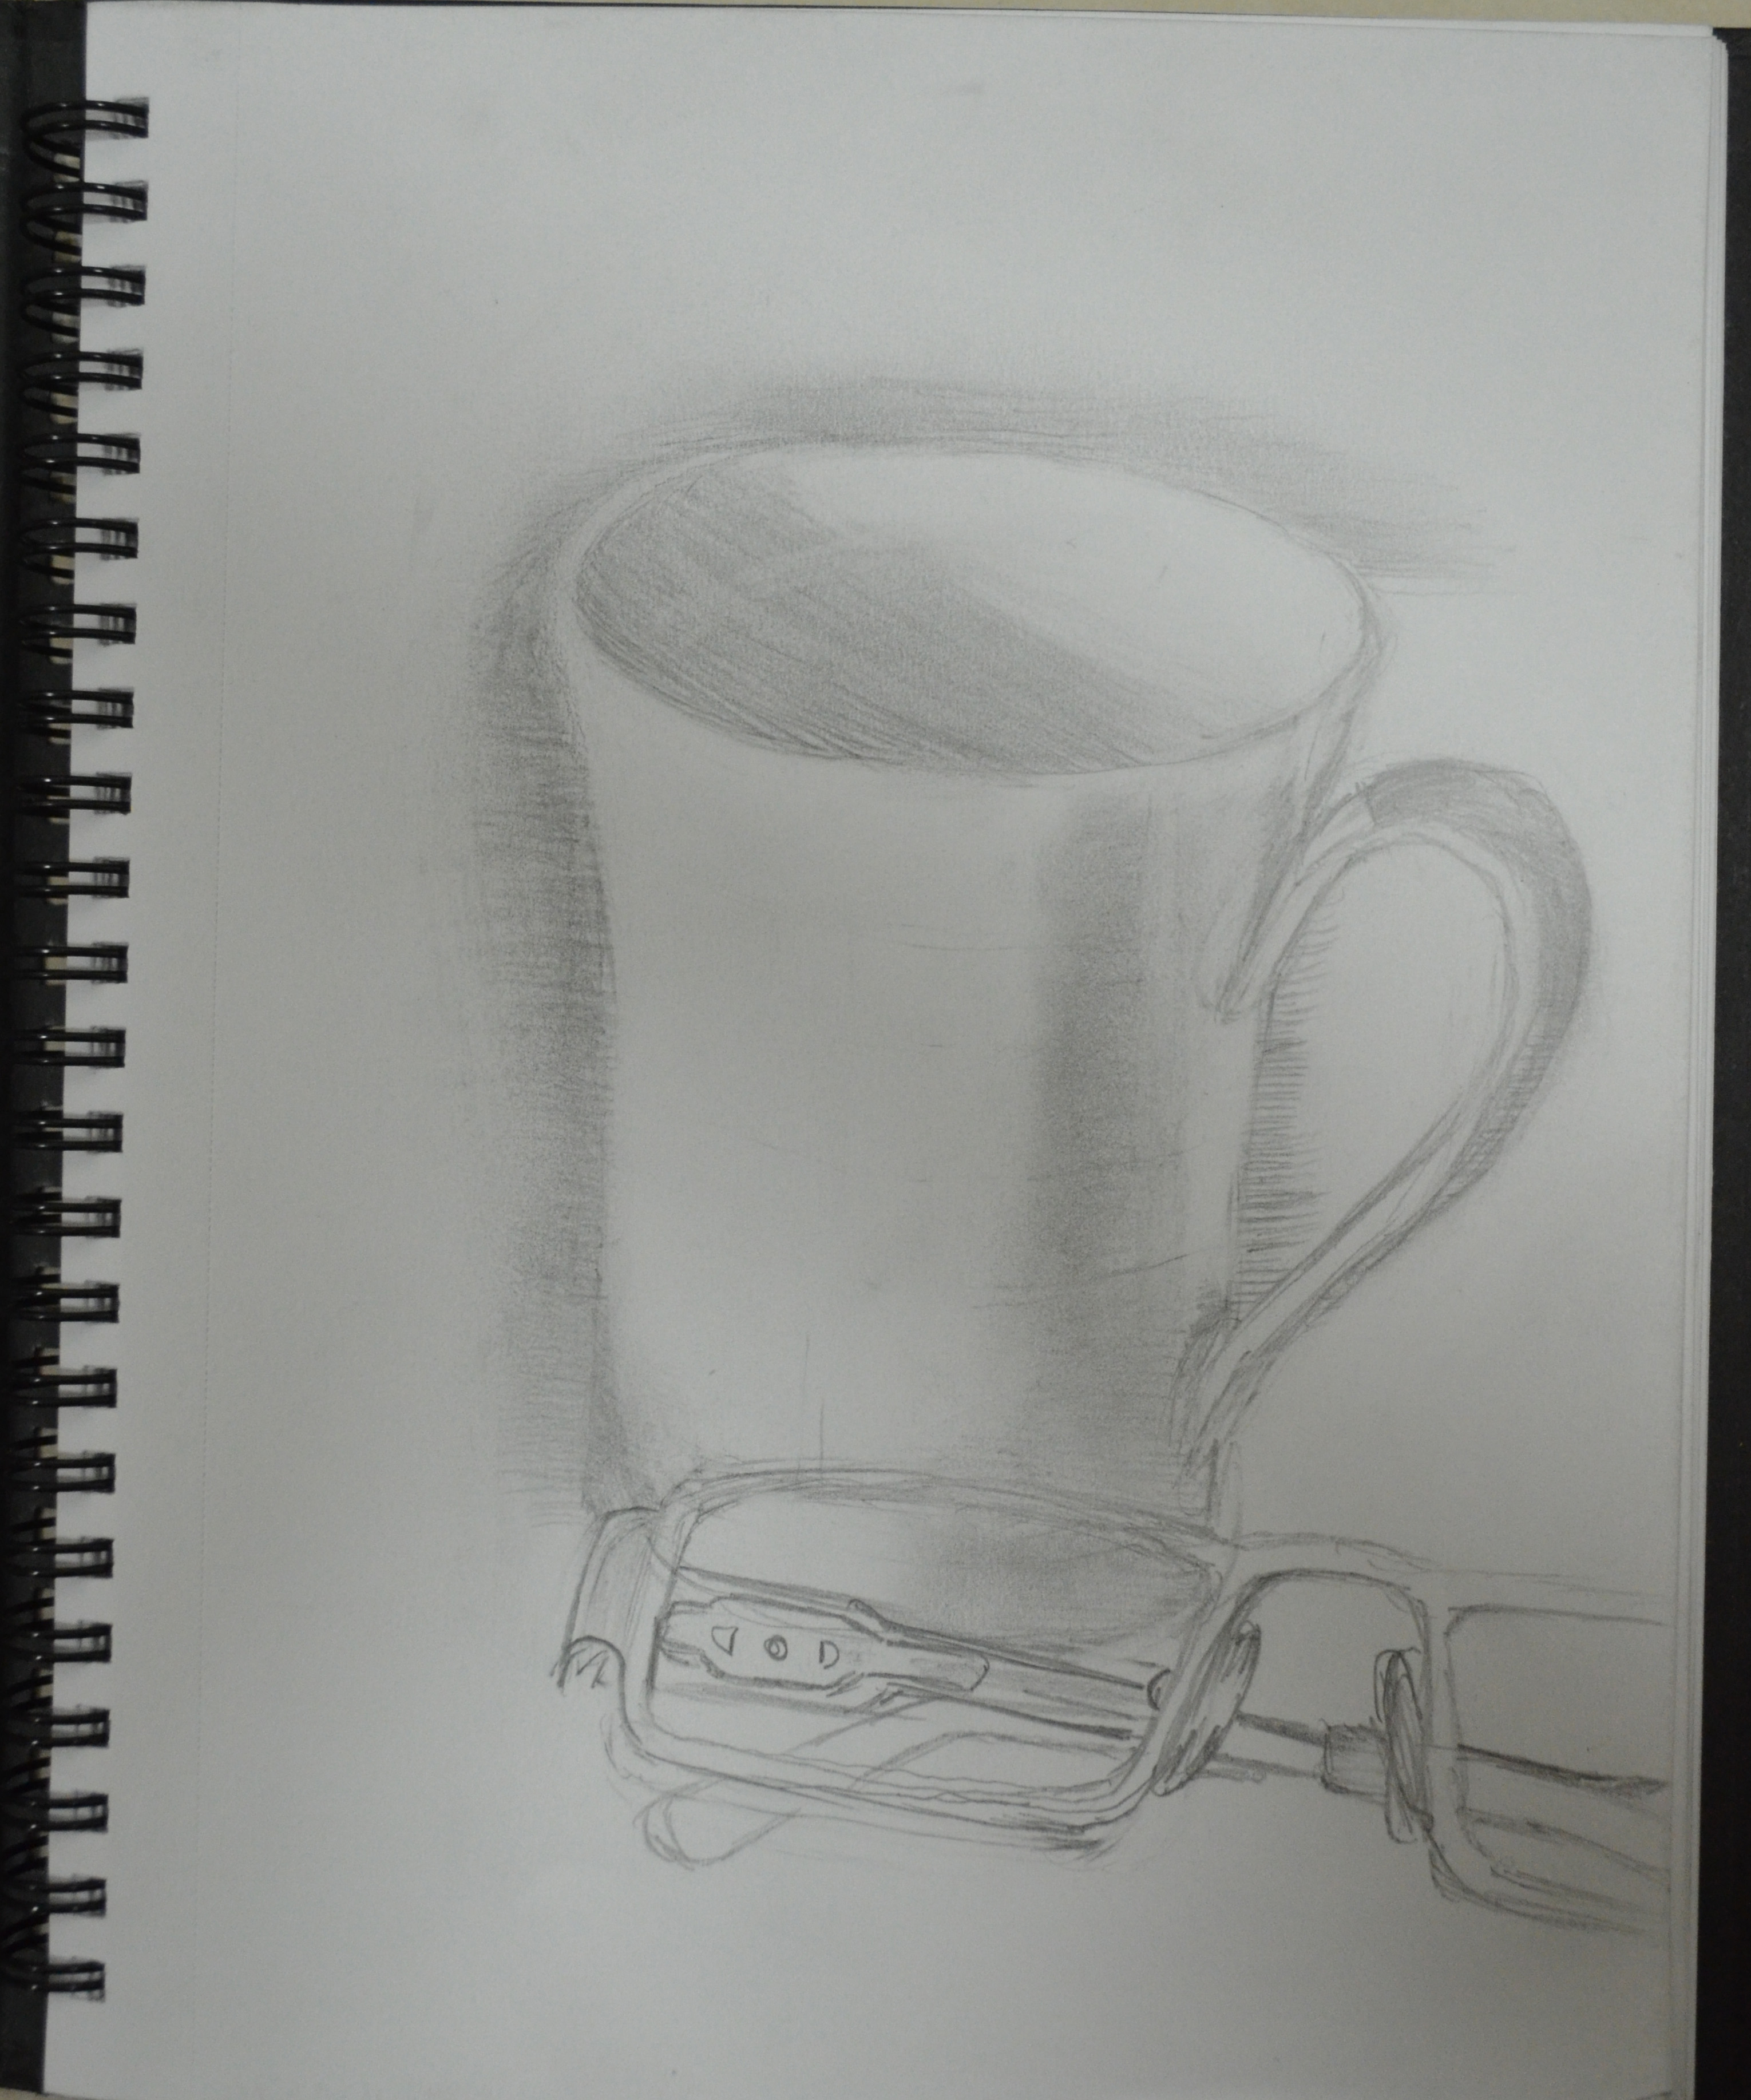 Pencil Drawing of Cup of Coffee - Stock Image - Everypixel